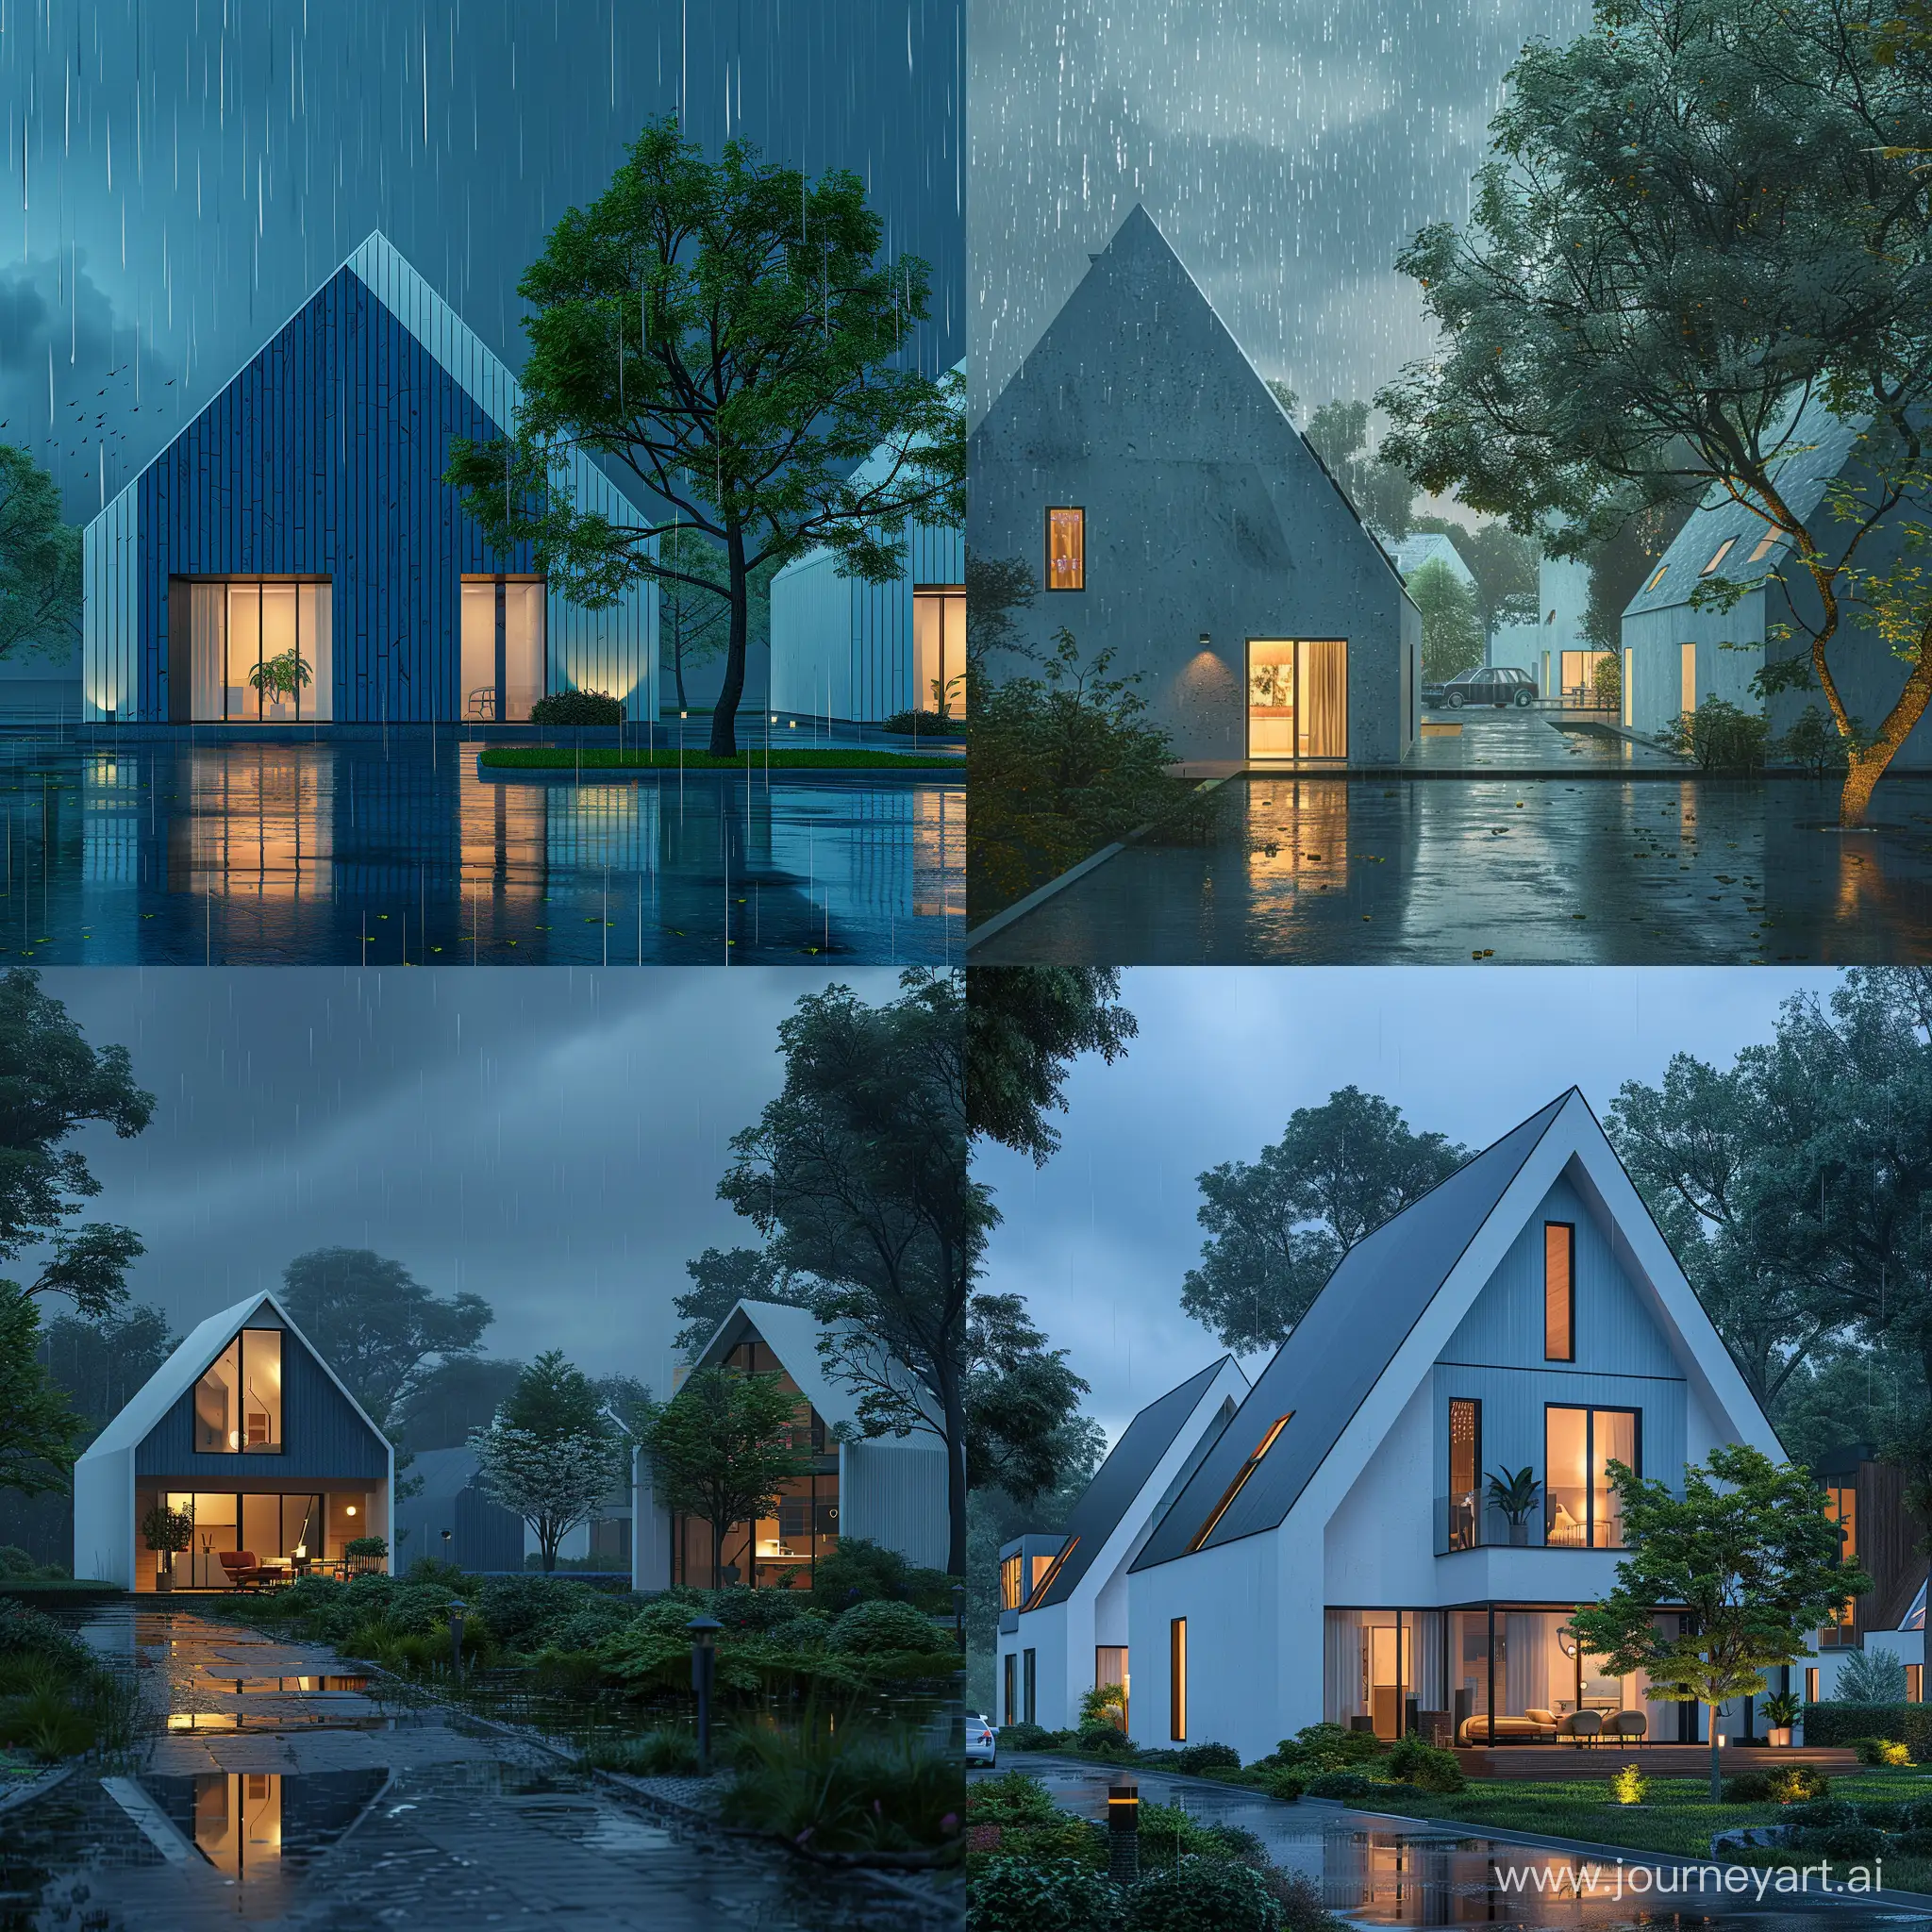 Realistic-Digital-Art-of-White-and-Blue-Modern-Gable-Houses-in-USA-on-a-Rainy-Night